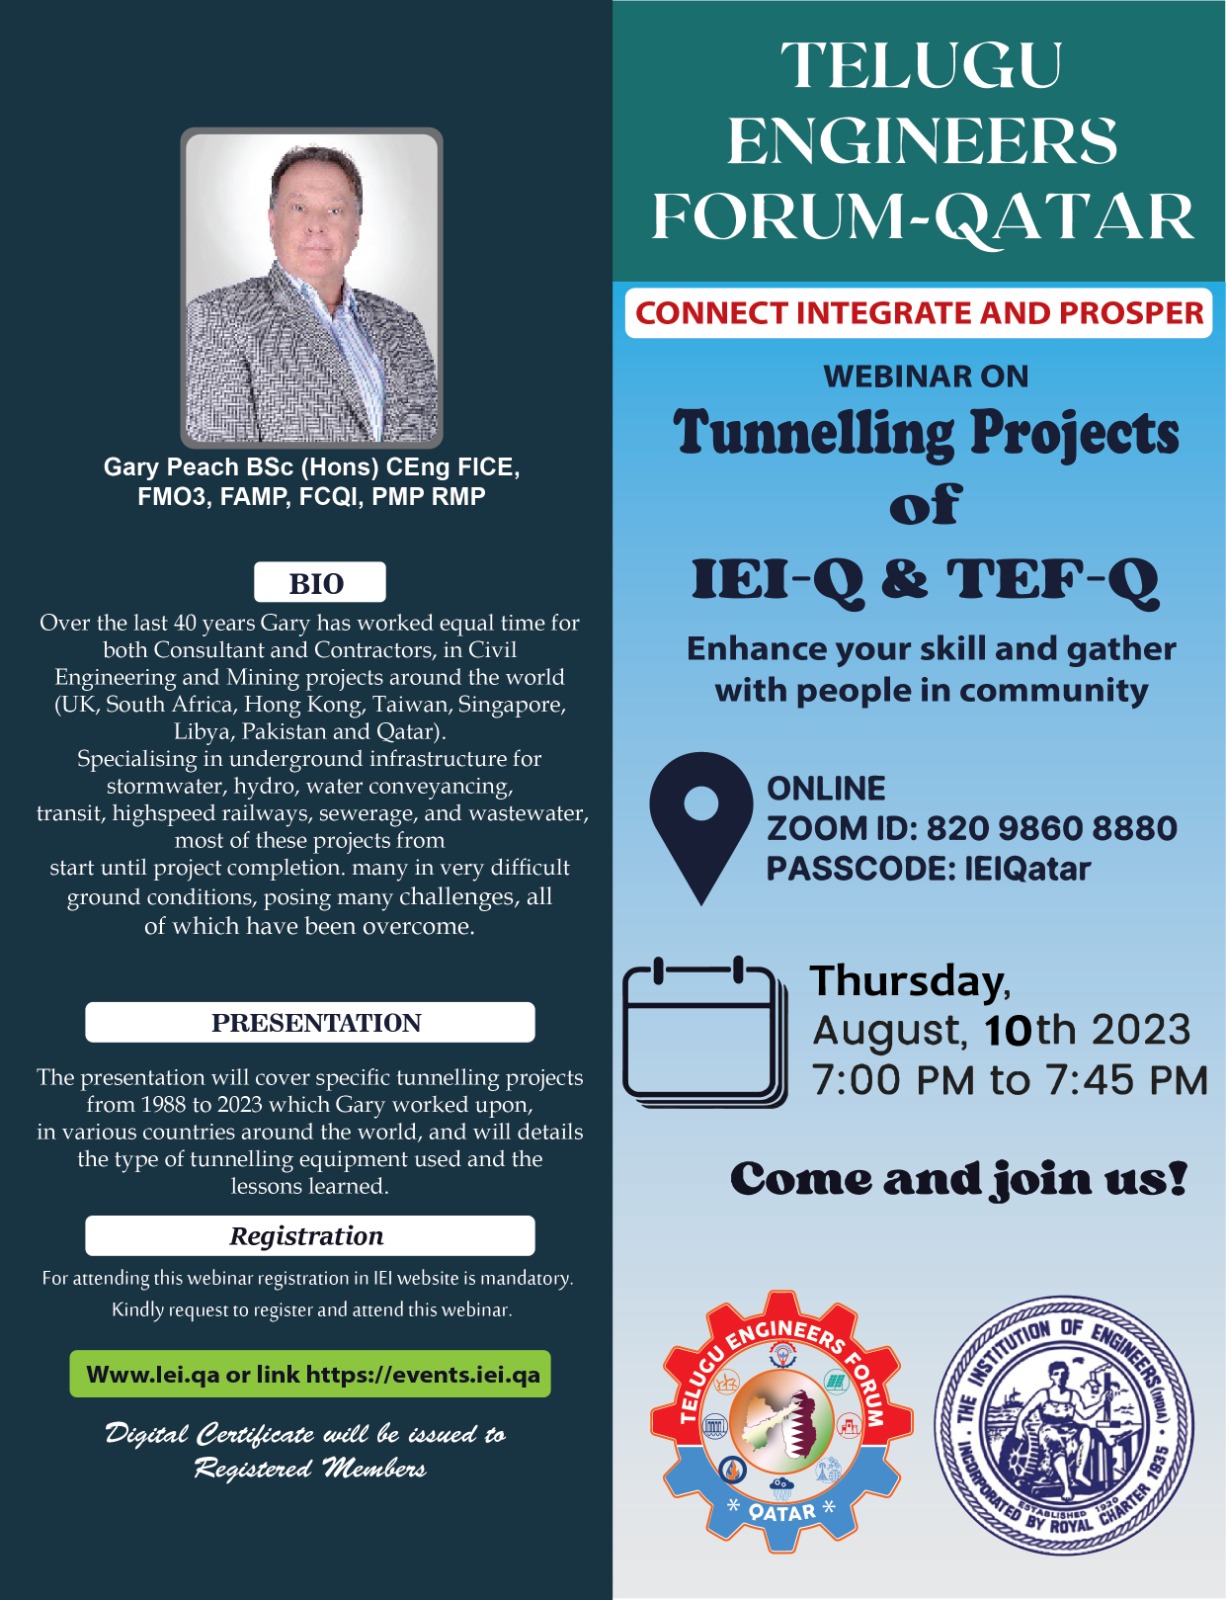 Webinar on Tunnelling Projects of IEI-Q & TEF-Q